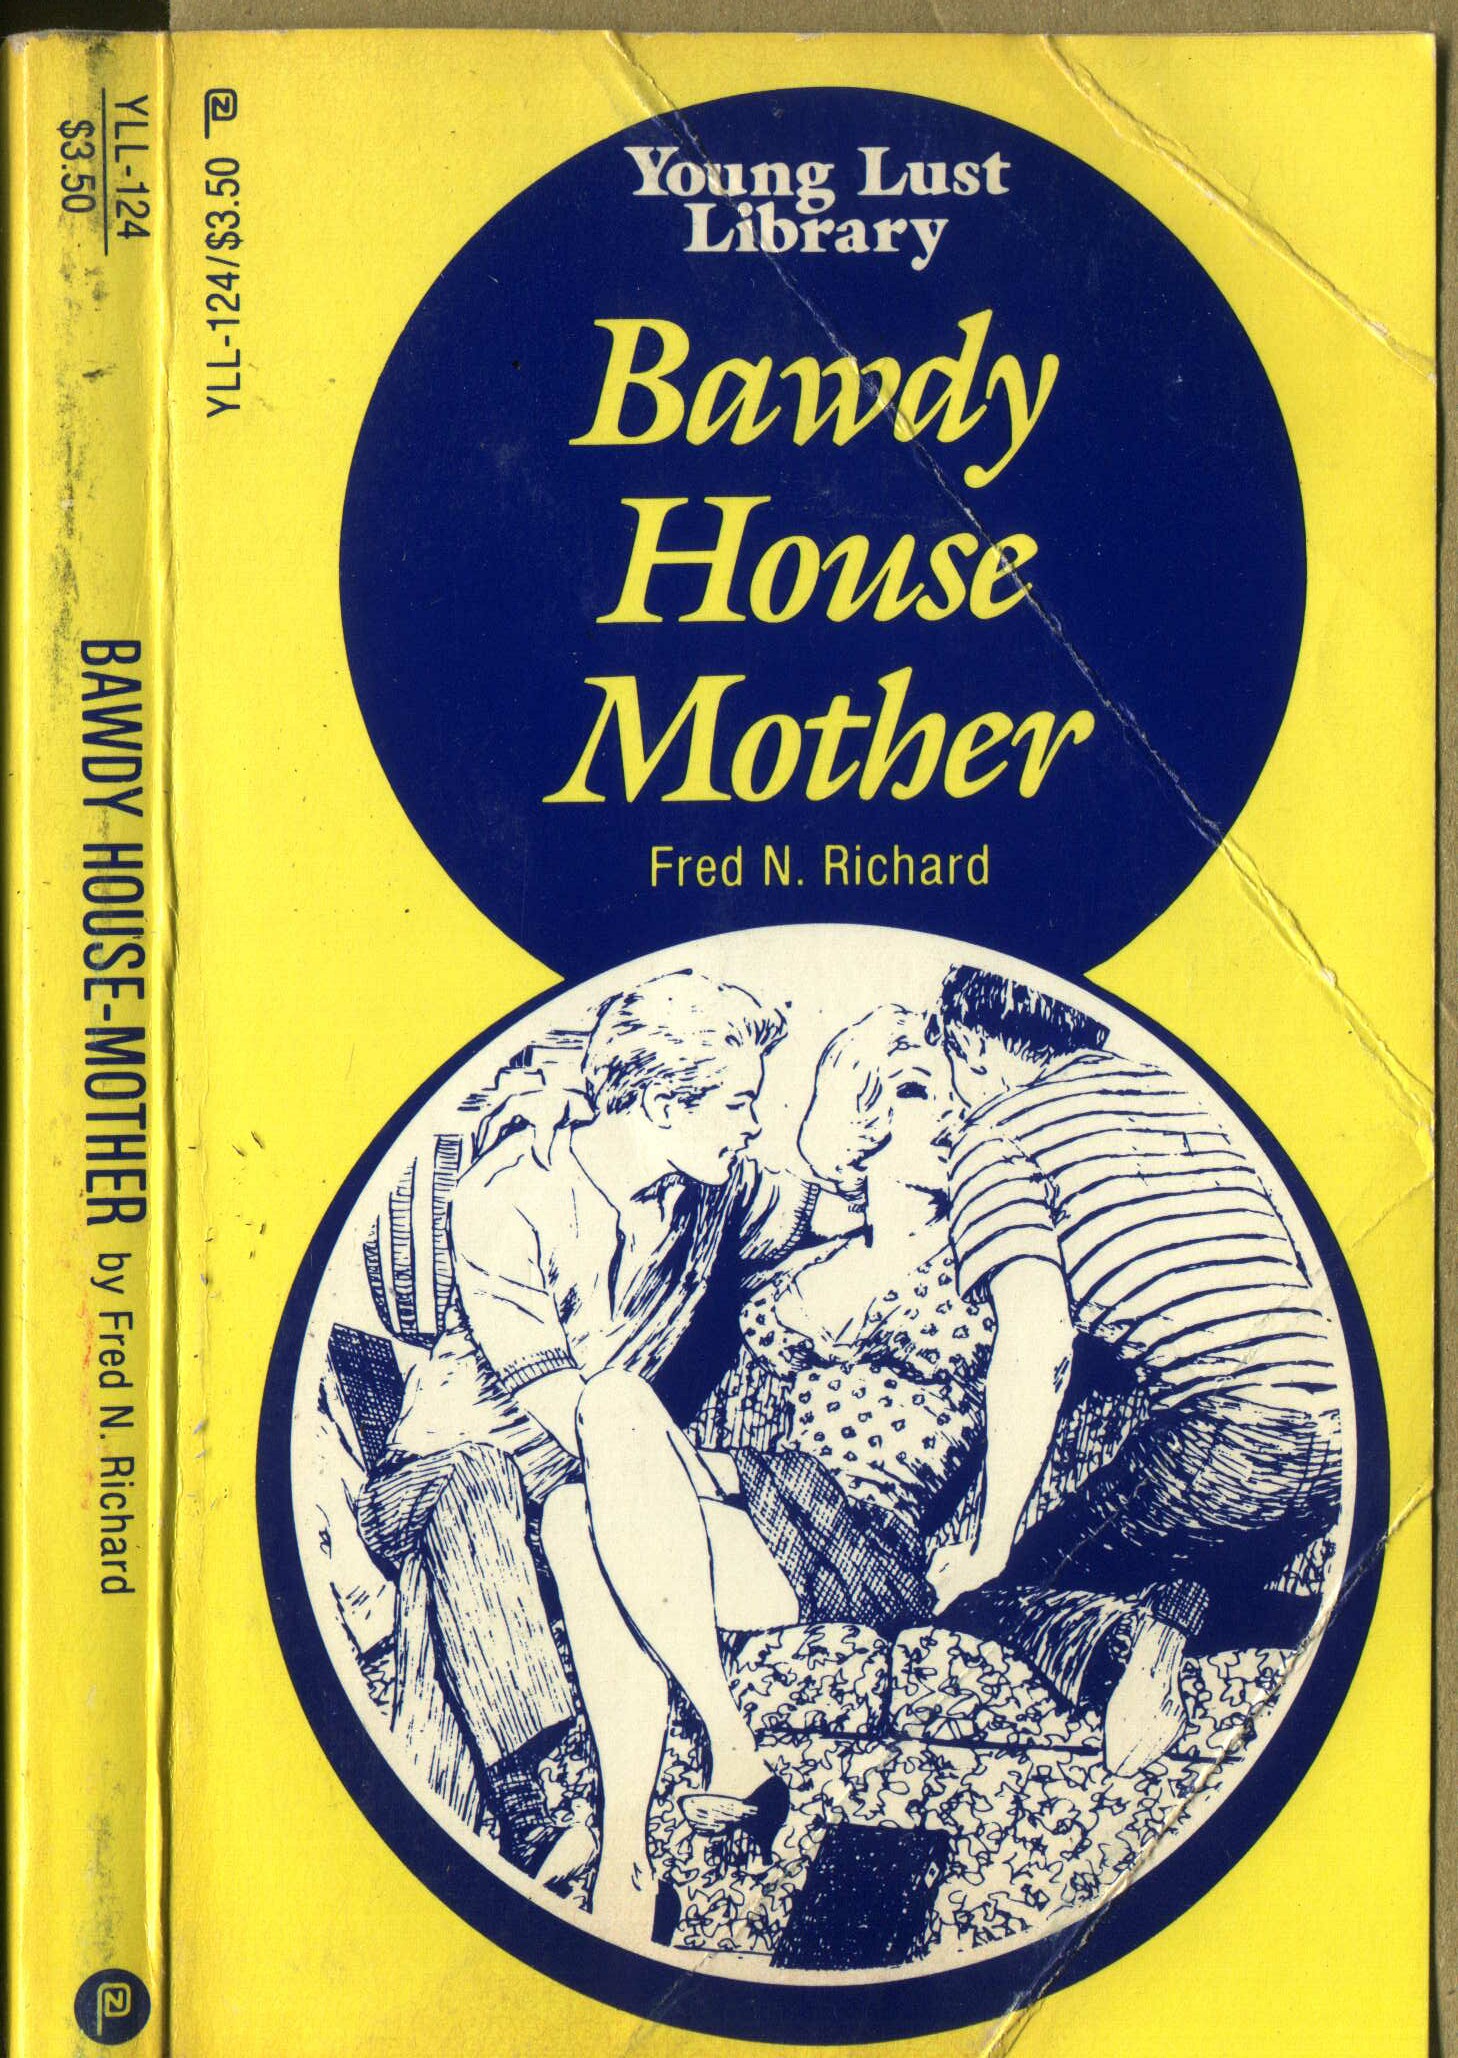 BawdyHouse Mother